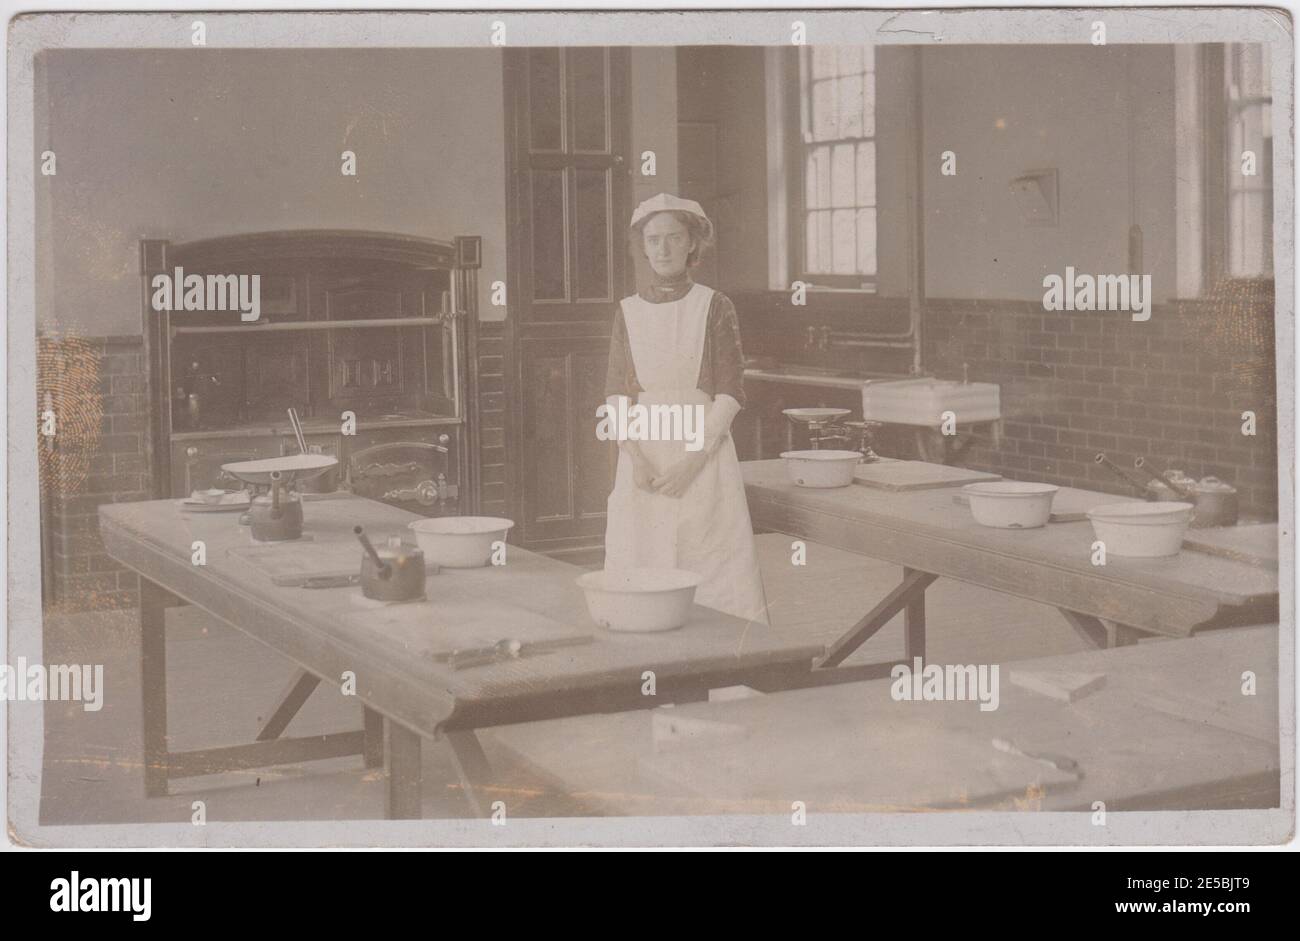 Edwardian servant standing in a large kitchen. Bowls and pans are on the tables around her. A sink and range are in the background. Stock Photo